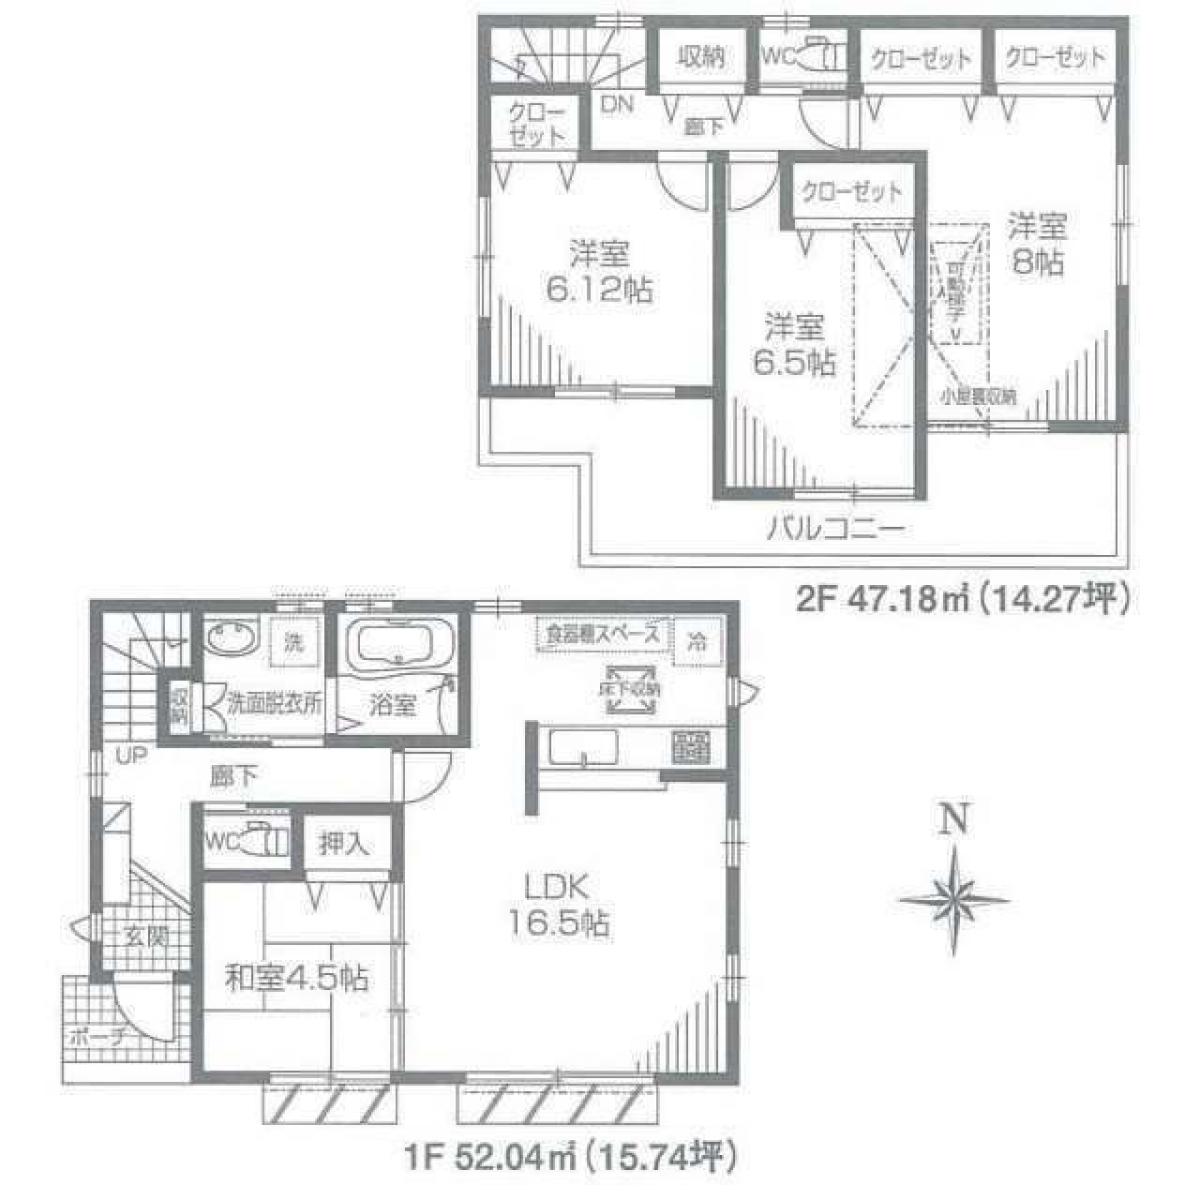 Picture of Home For Sale in Kunitachi Shi, Tokyo, Japan